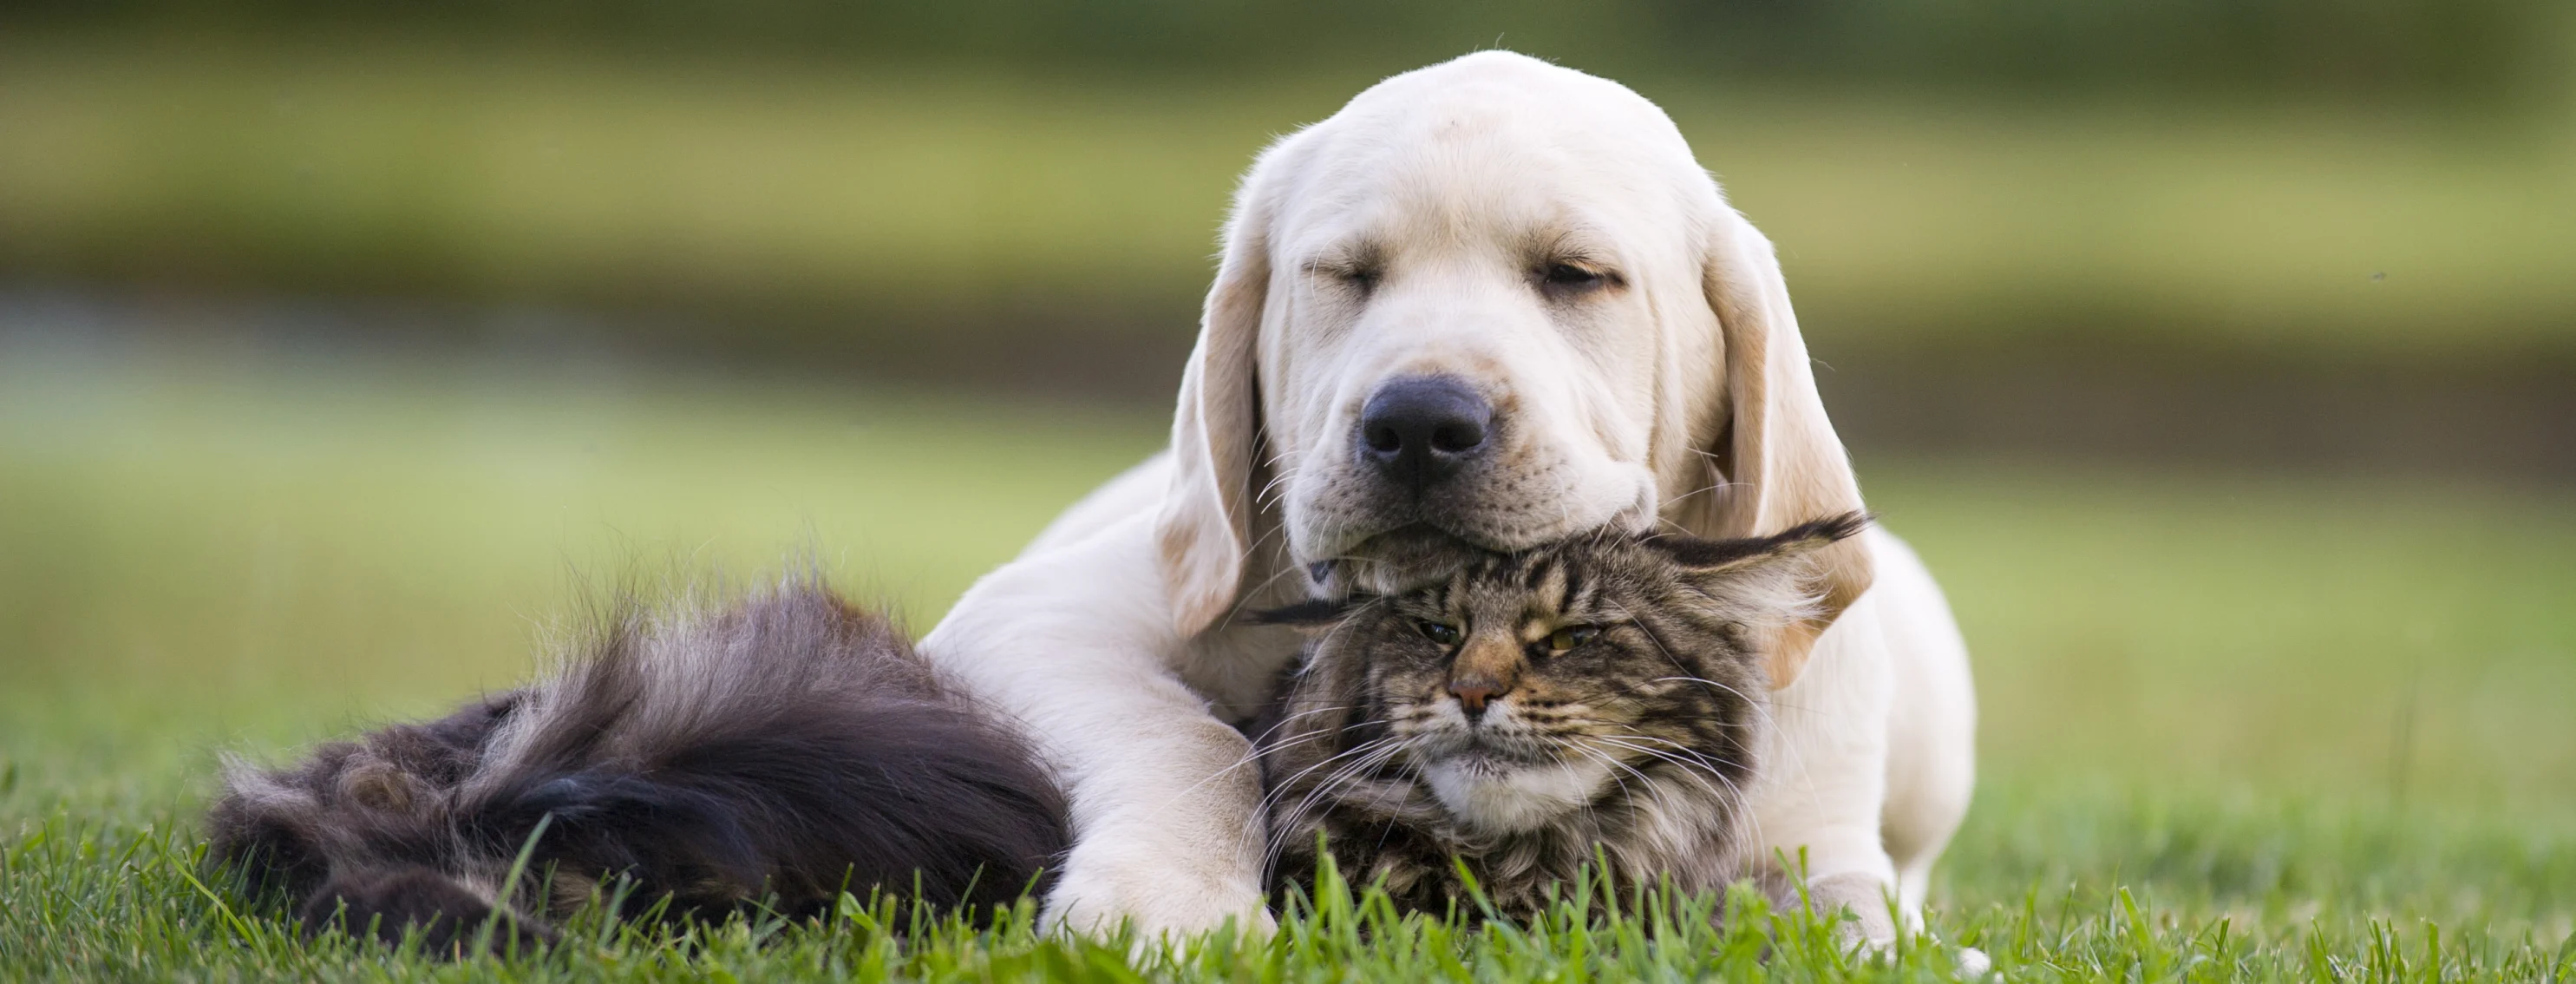 dog and cat sleeping in a grassy field 